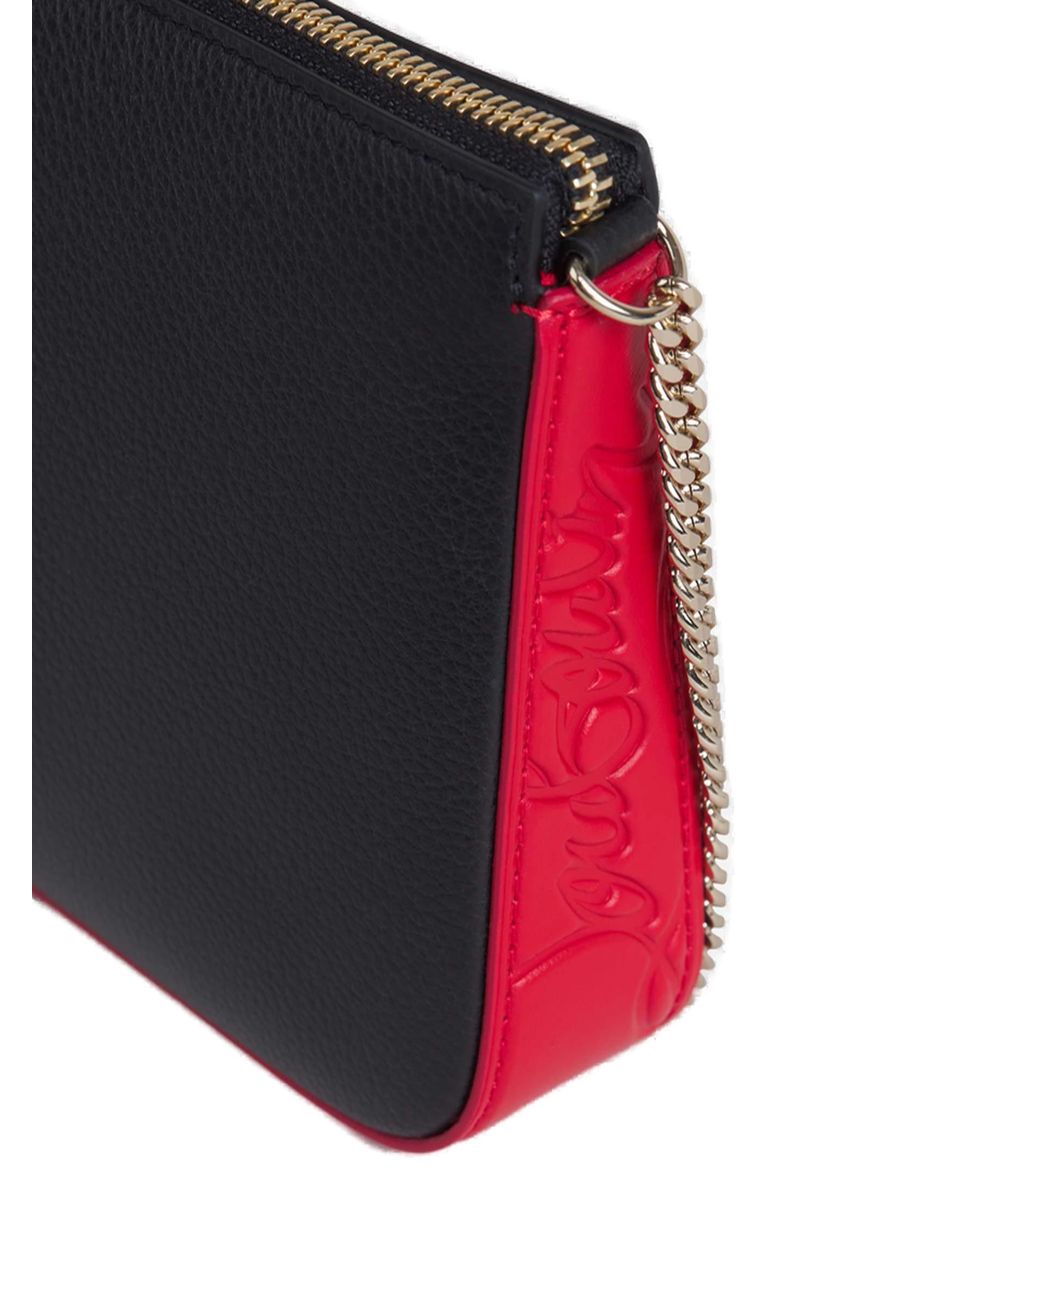 Loubila Pouch - Pouch - Patent calf and strass - Black - Christian